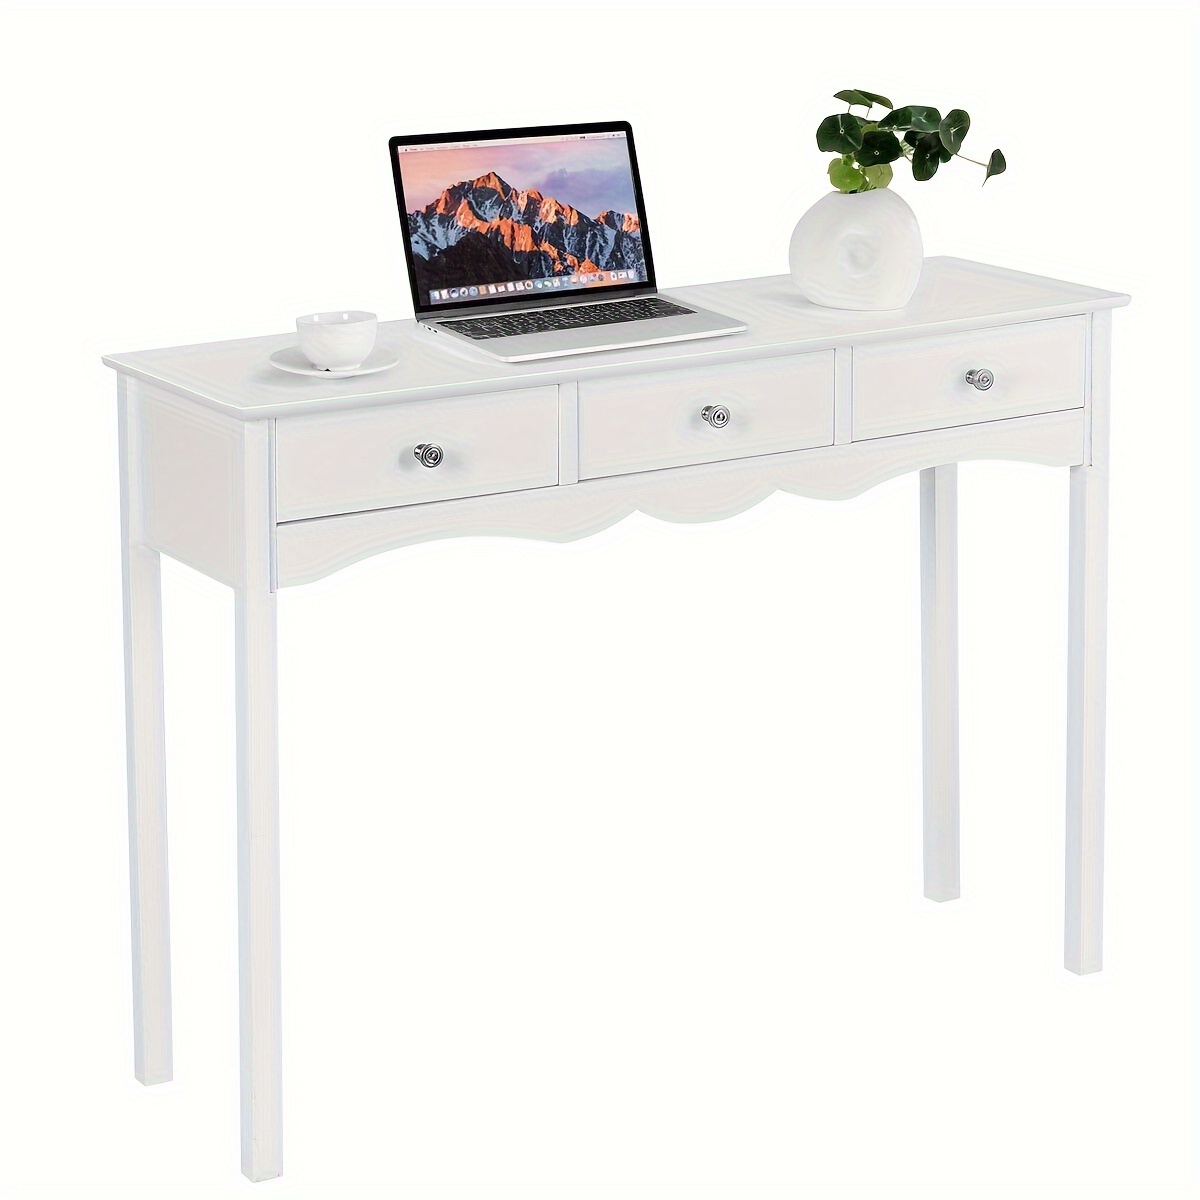 

1pc Console Table, Hall Table, Side Table With 3 Drawers, Entryway Desk, Accent Table For Living Room, Bedroom, Entryway, Multifunctional Usage Accent Hall Table, White